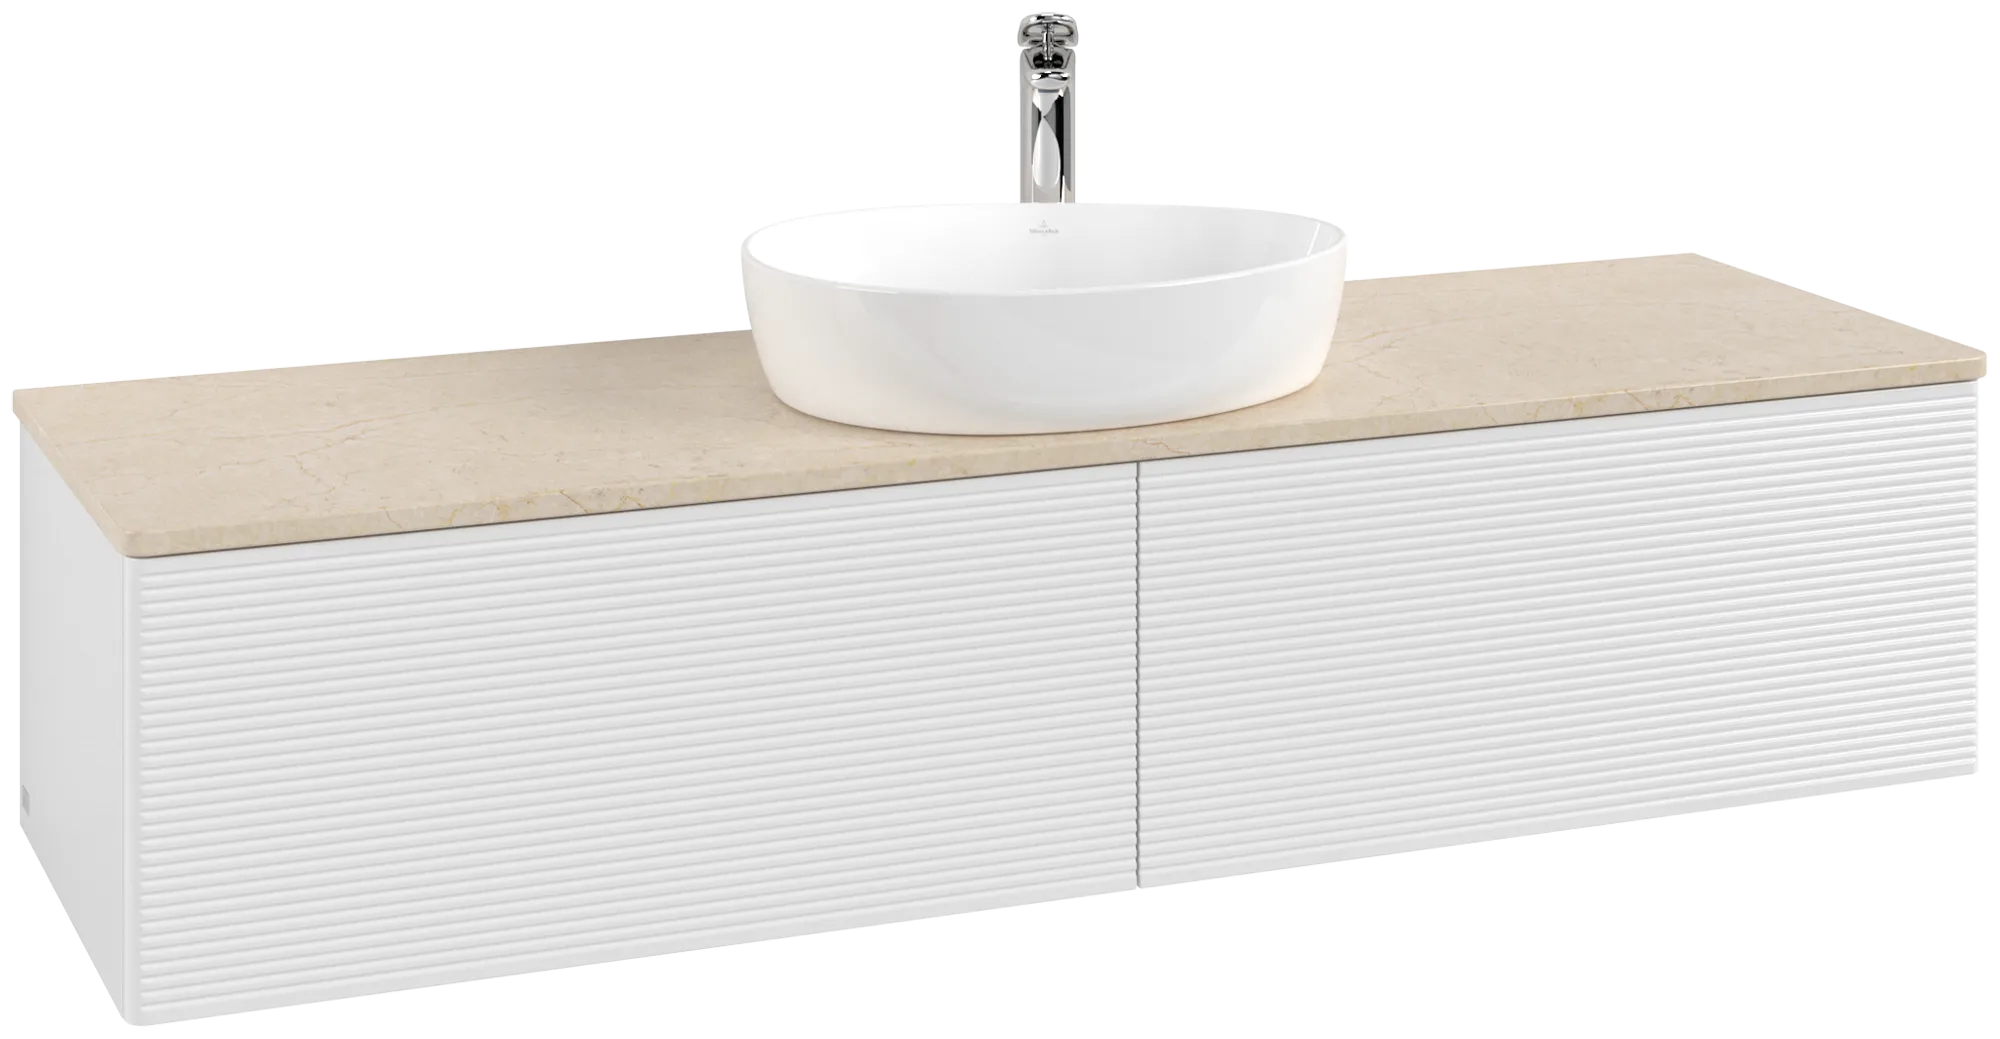 VILLEROY BOCH Antao Vanity unit, with lighting, 2 pull-out compartments, 1600 x 360 x 500 mm, Front with grain texture, Glossy White Lacquer / Botticino #L36153GF resmi